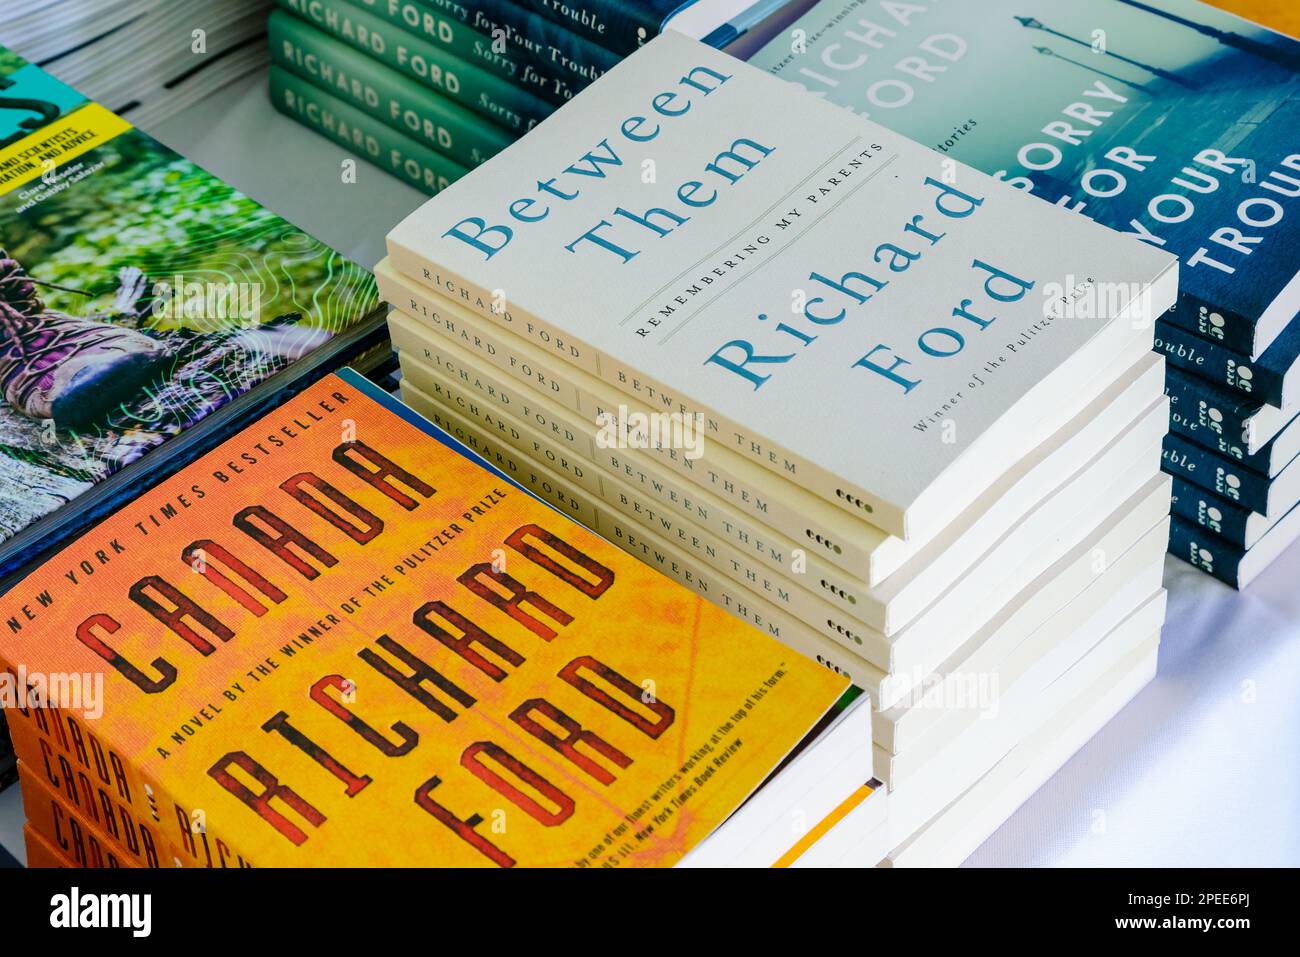 NEW ORLEANS, LA, USA - MARCH 11, 2023: Books displayed on a table for sale at a free literary event Stock Photo